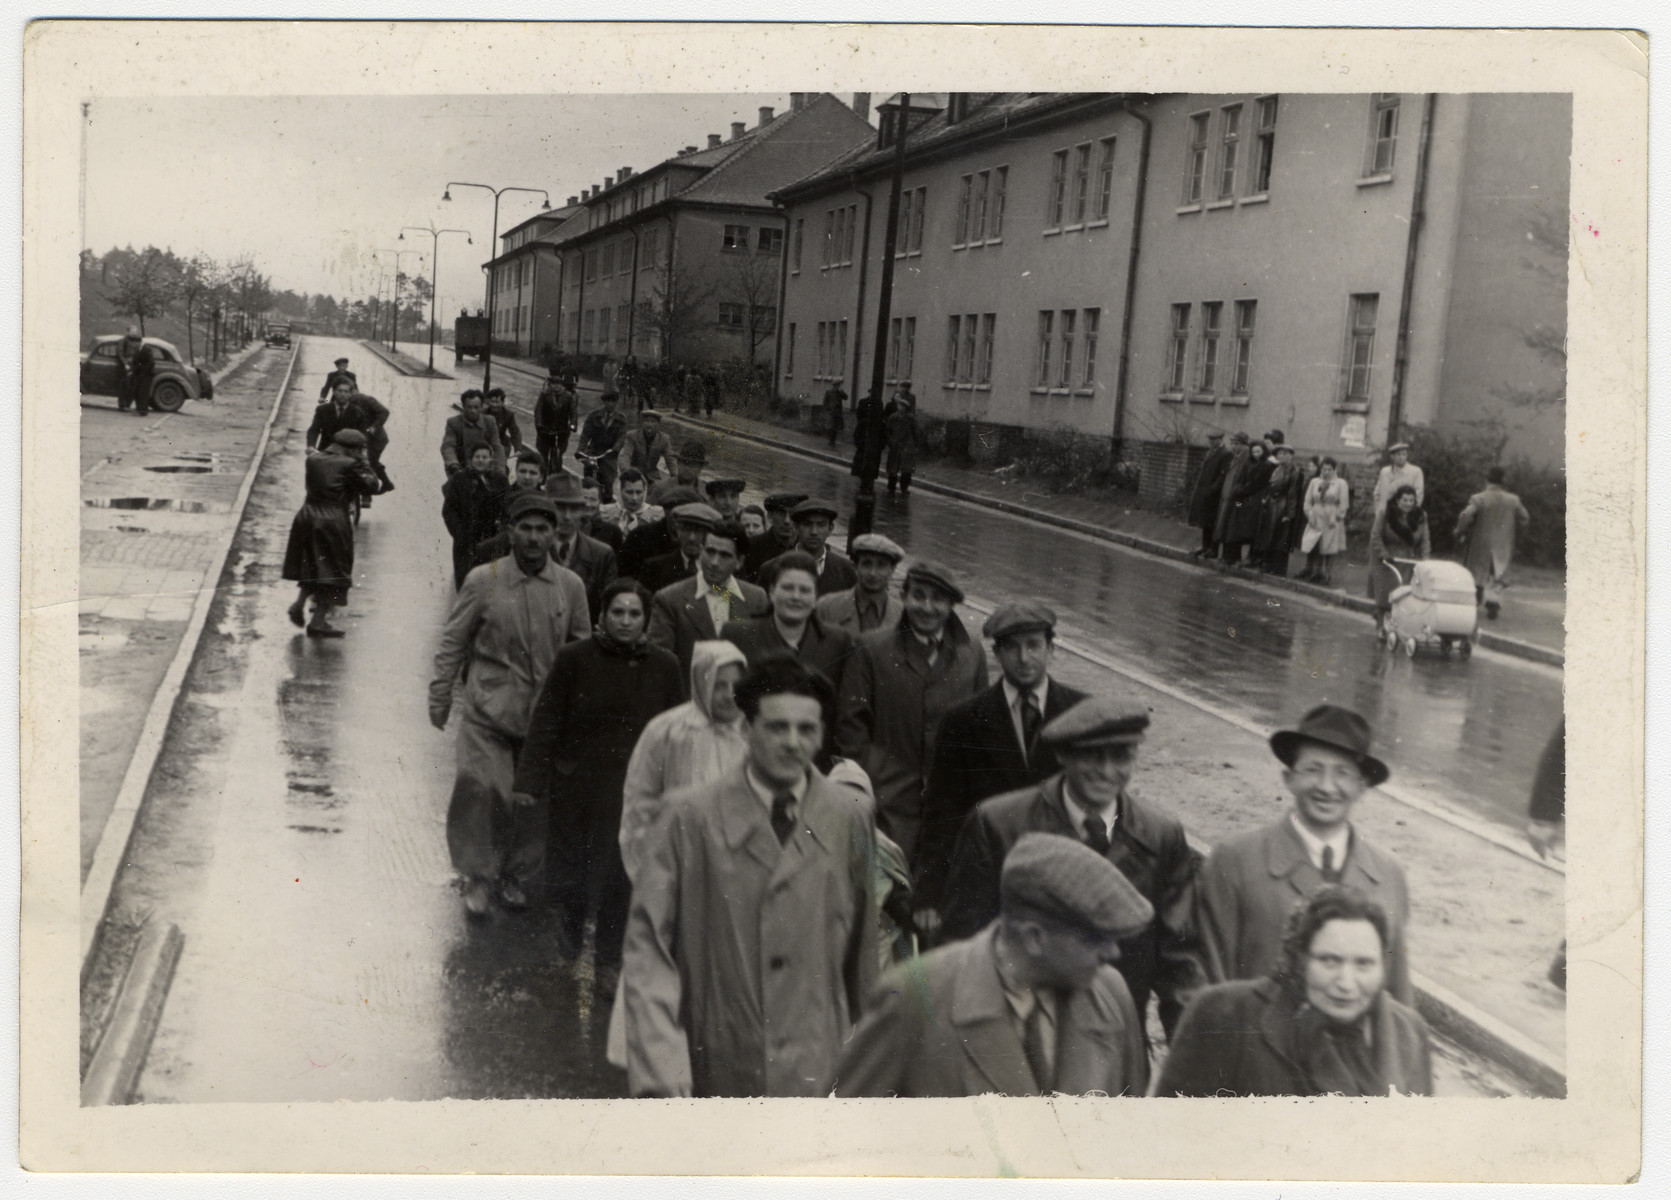 Jewish displaced persons march through the streets of the Bergen Belsen camp.

Among those pictured are Shloime and Sonia Proszkowicz.